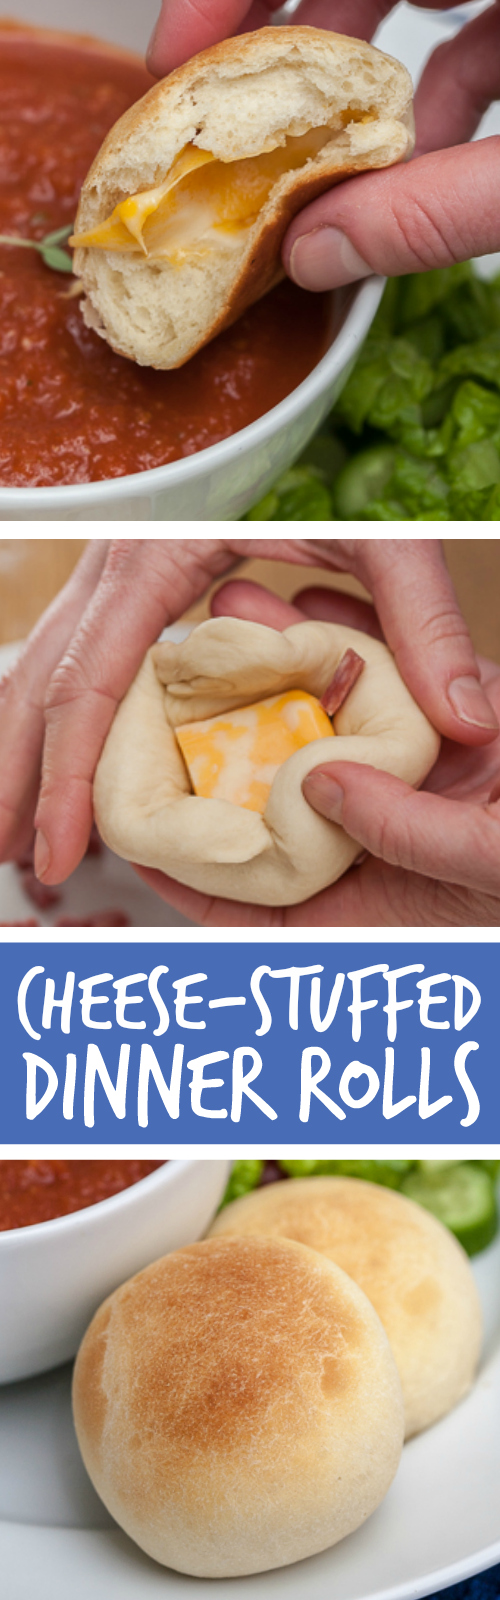 Warm bread oozing with melted cheese is hard to beat. Inspired by cheese zombies, these Cheese-Stuffed Dinner Rolls accompany soup and salad perfectly.